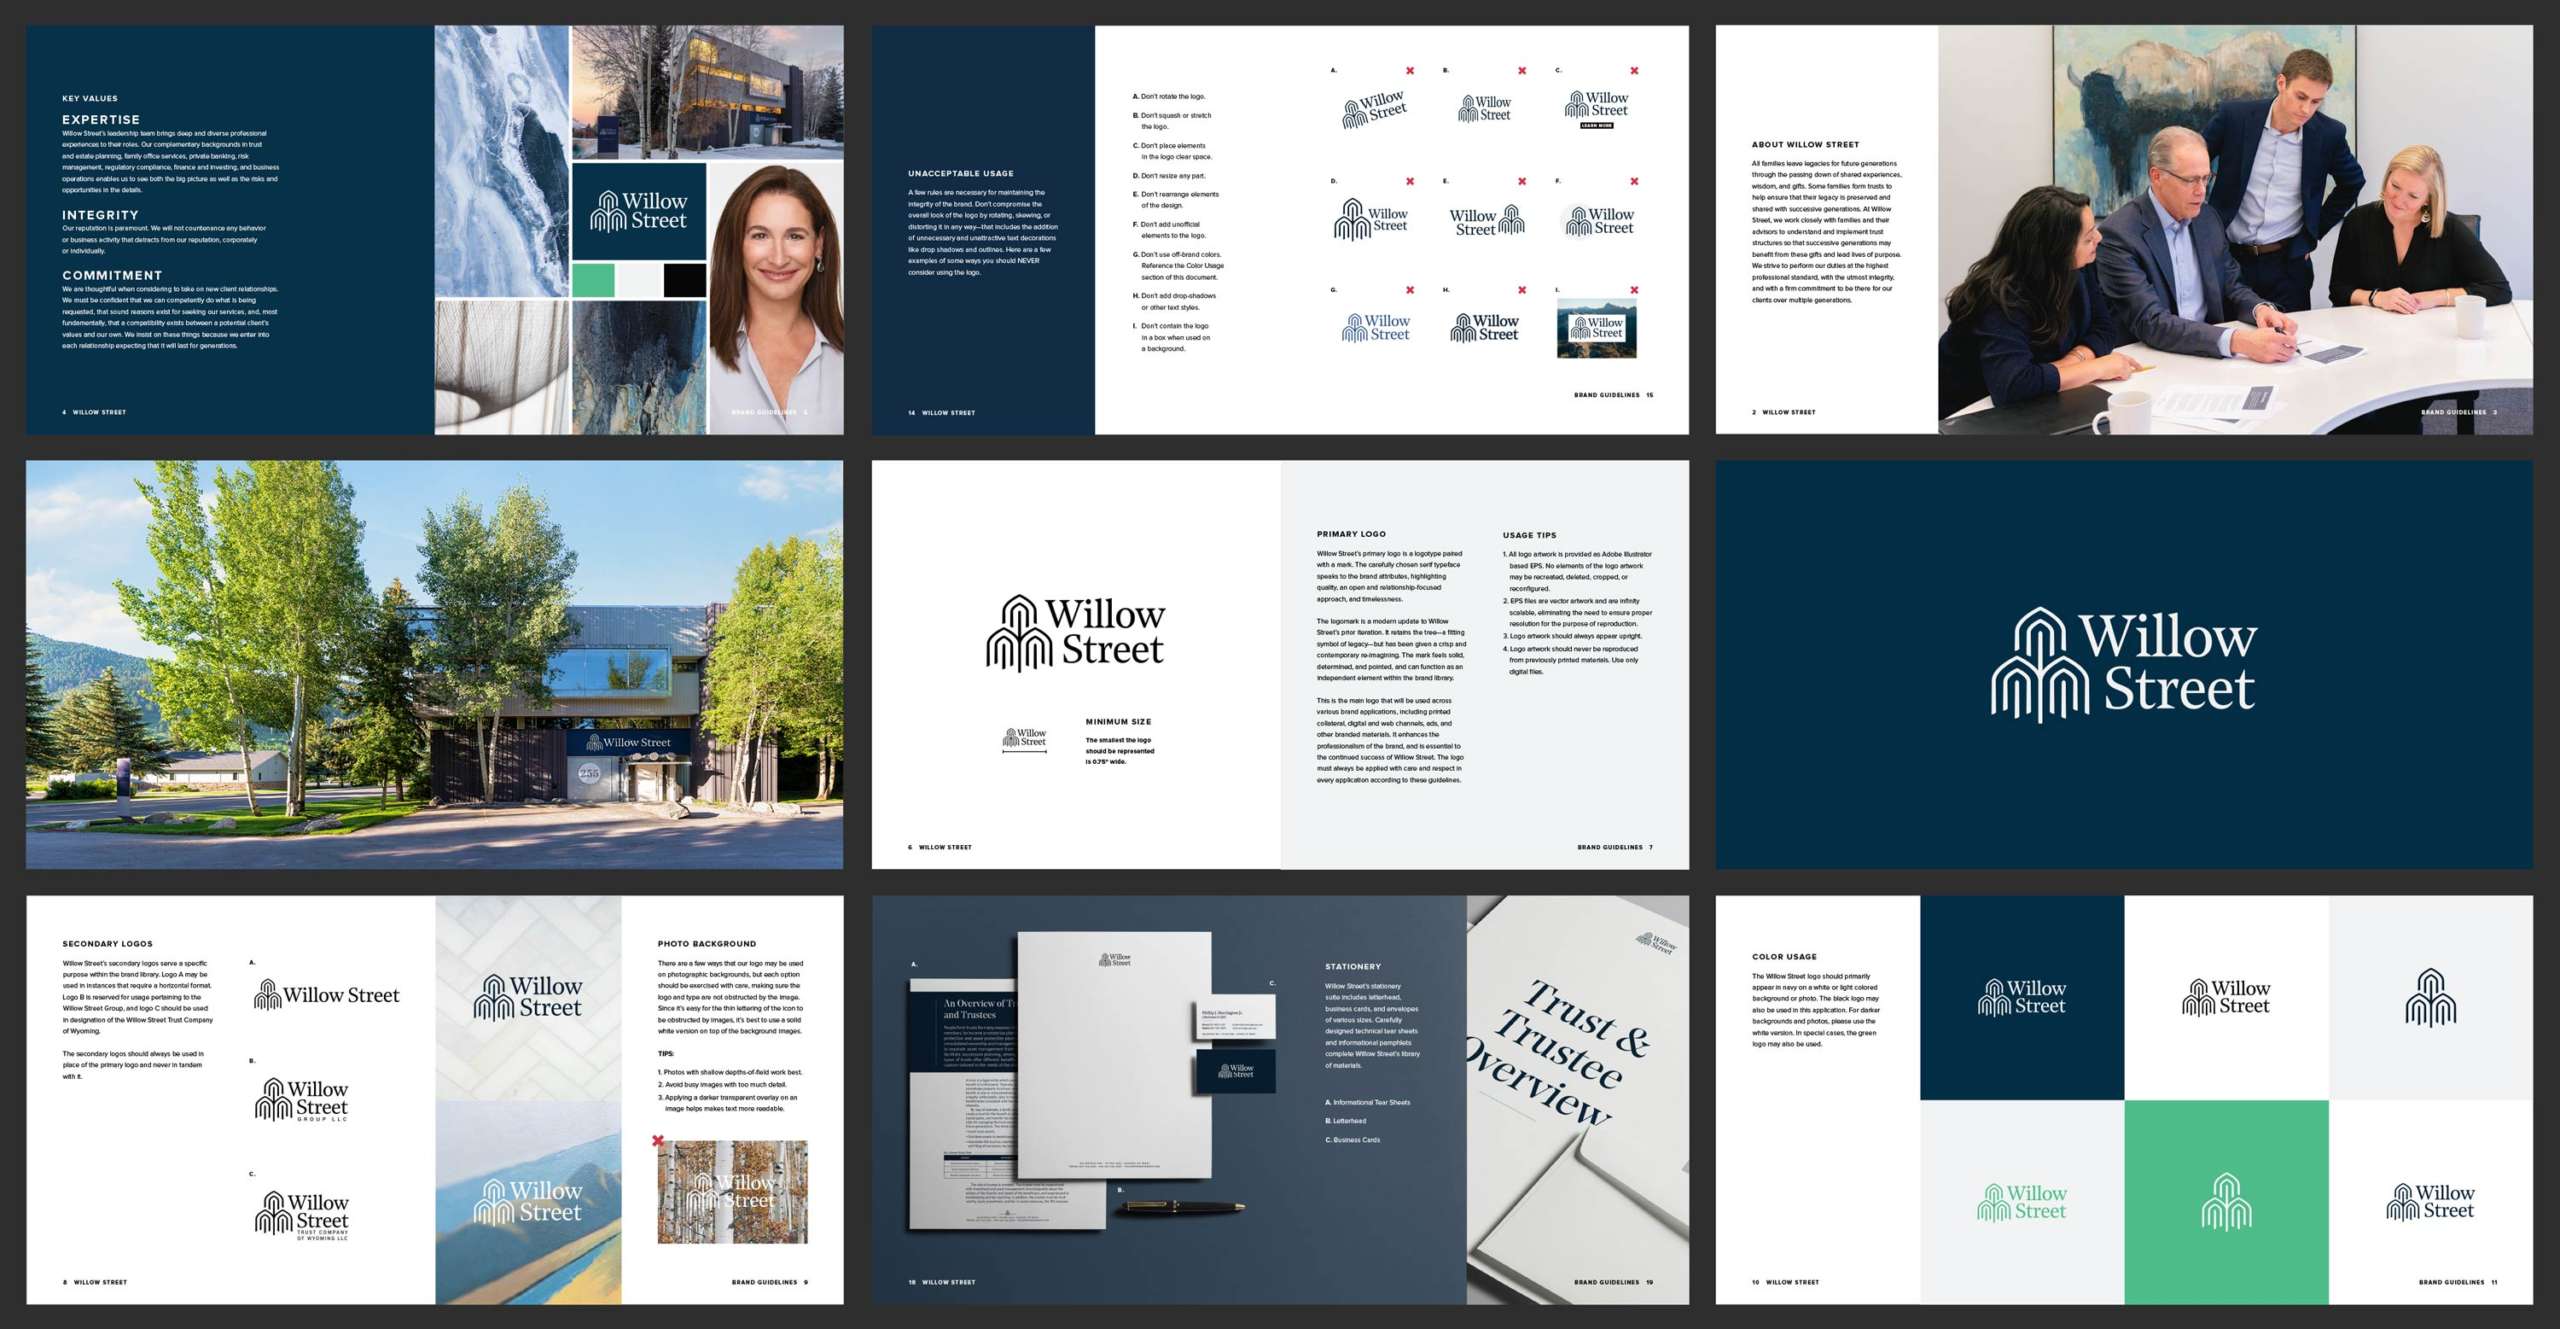 New-Thought-Willow-Street-Group-Branding-Brand-Guidelines-Updated-fullscreen